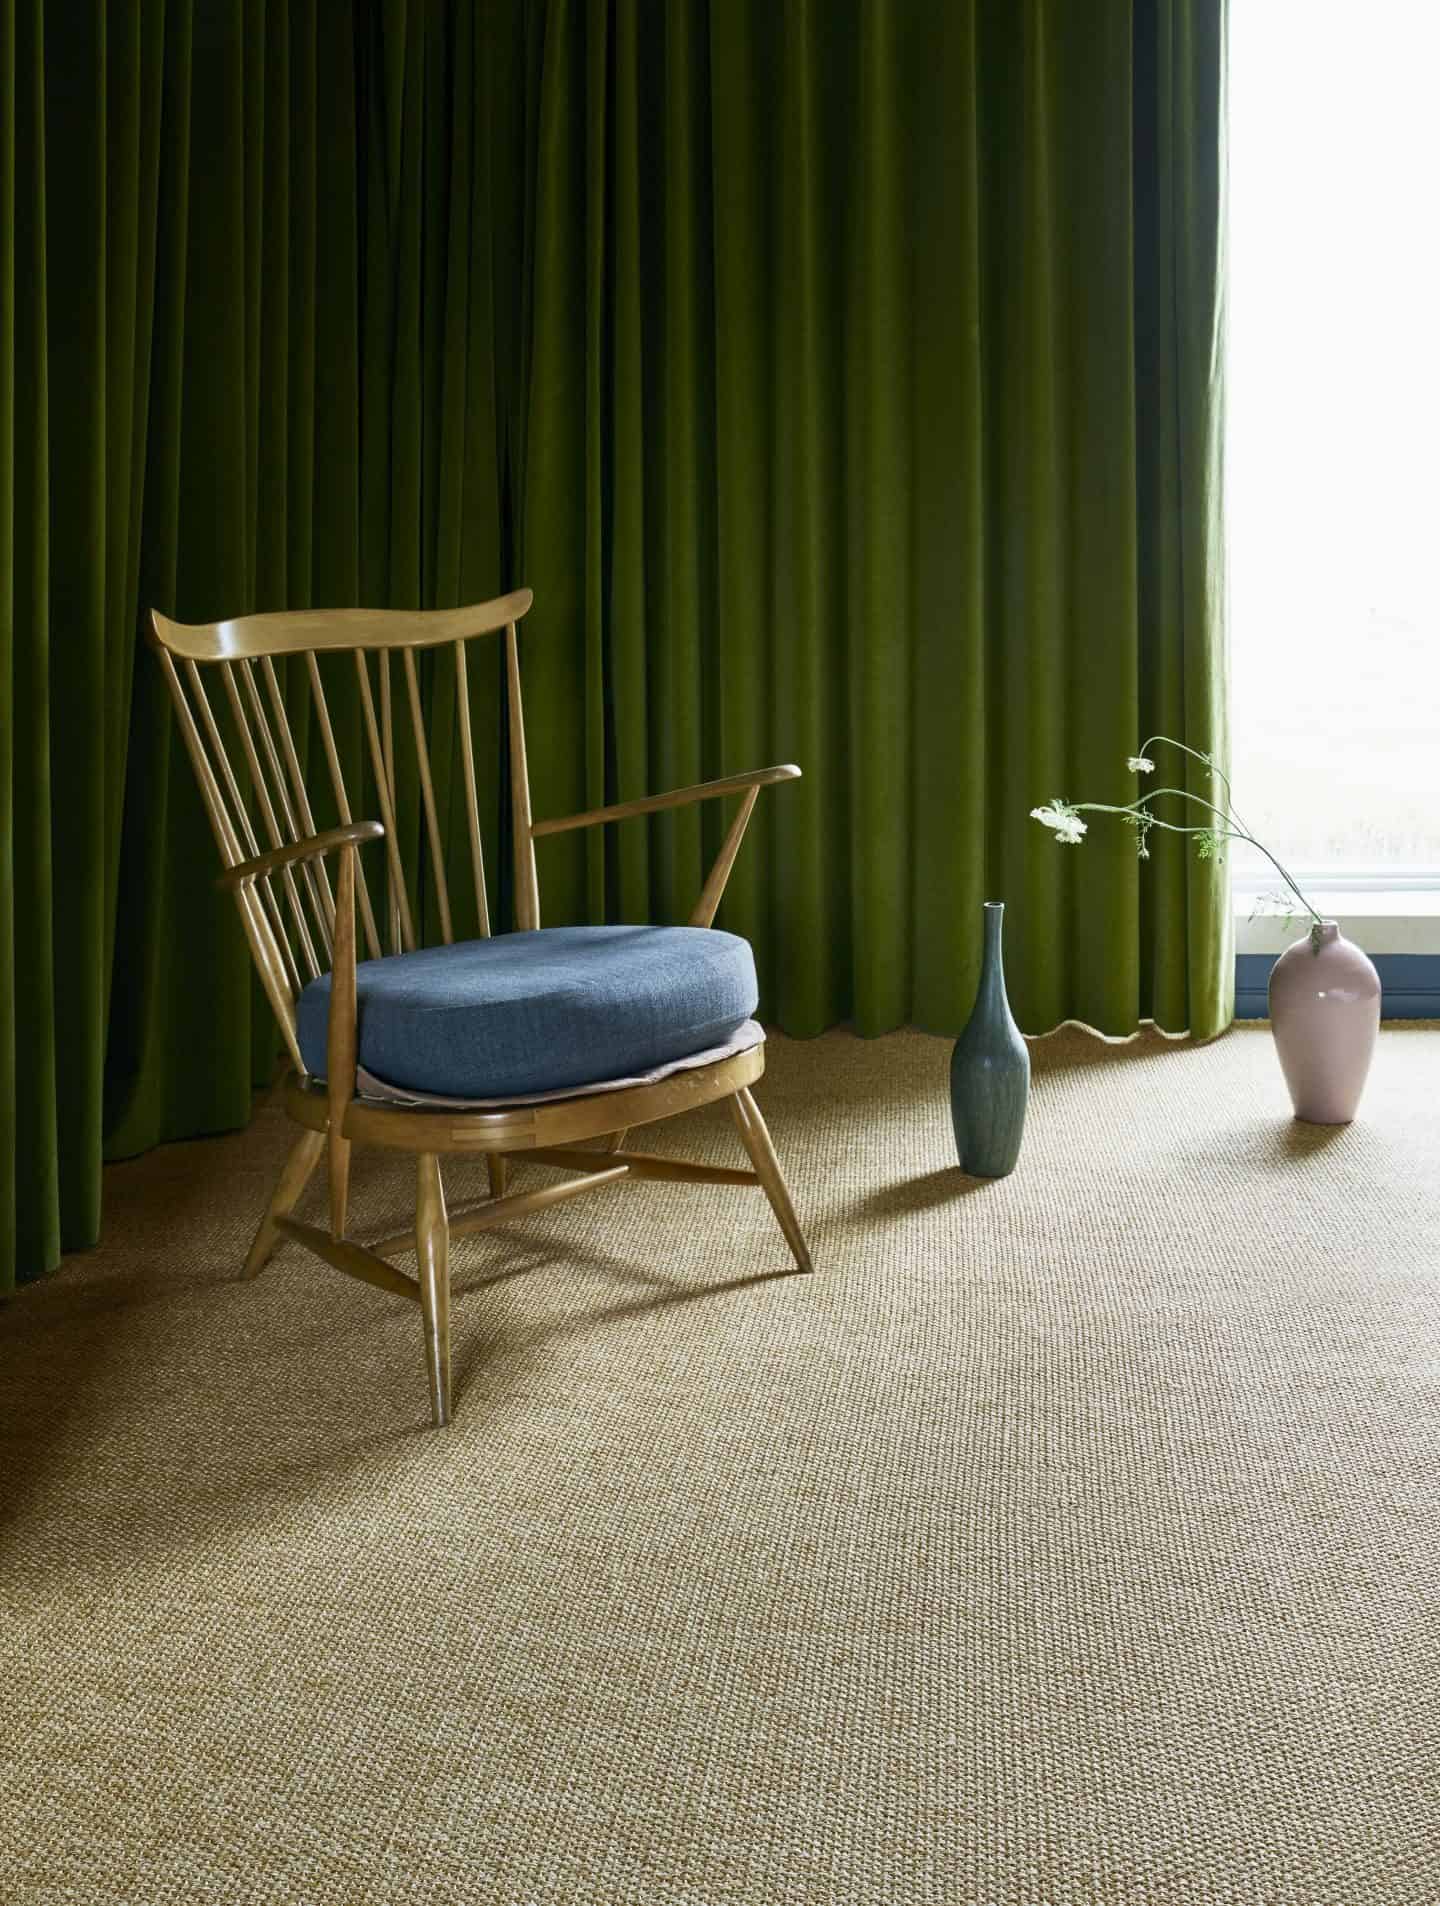 A wooden chair on sisal carpet by Kersaint Cobb in Panama, Oatmeal.